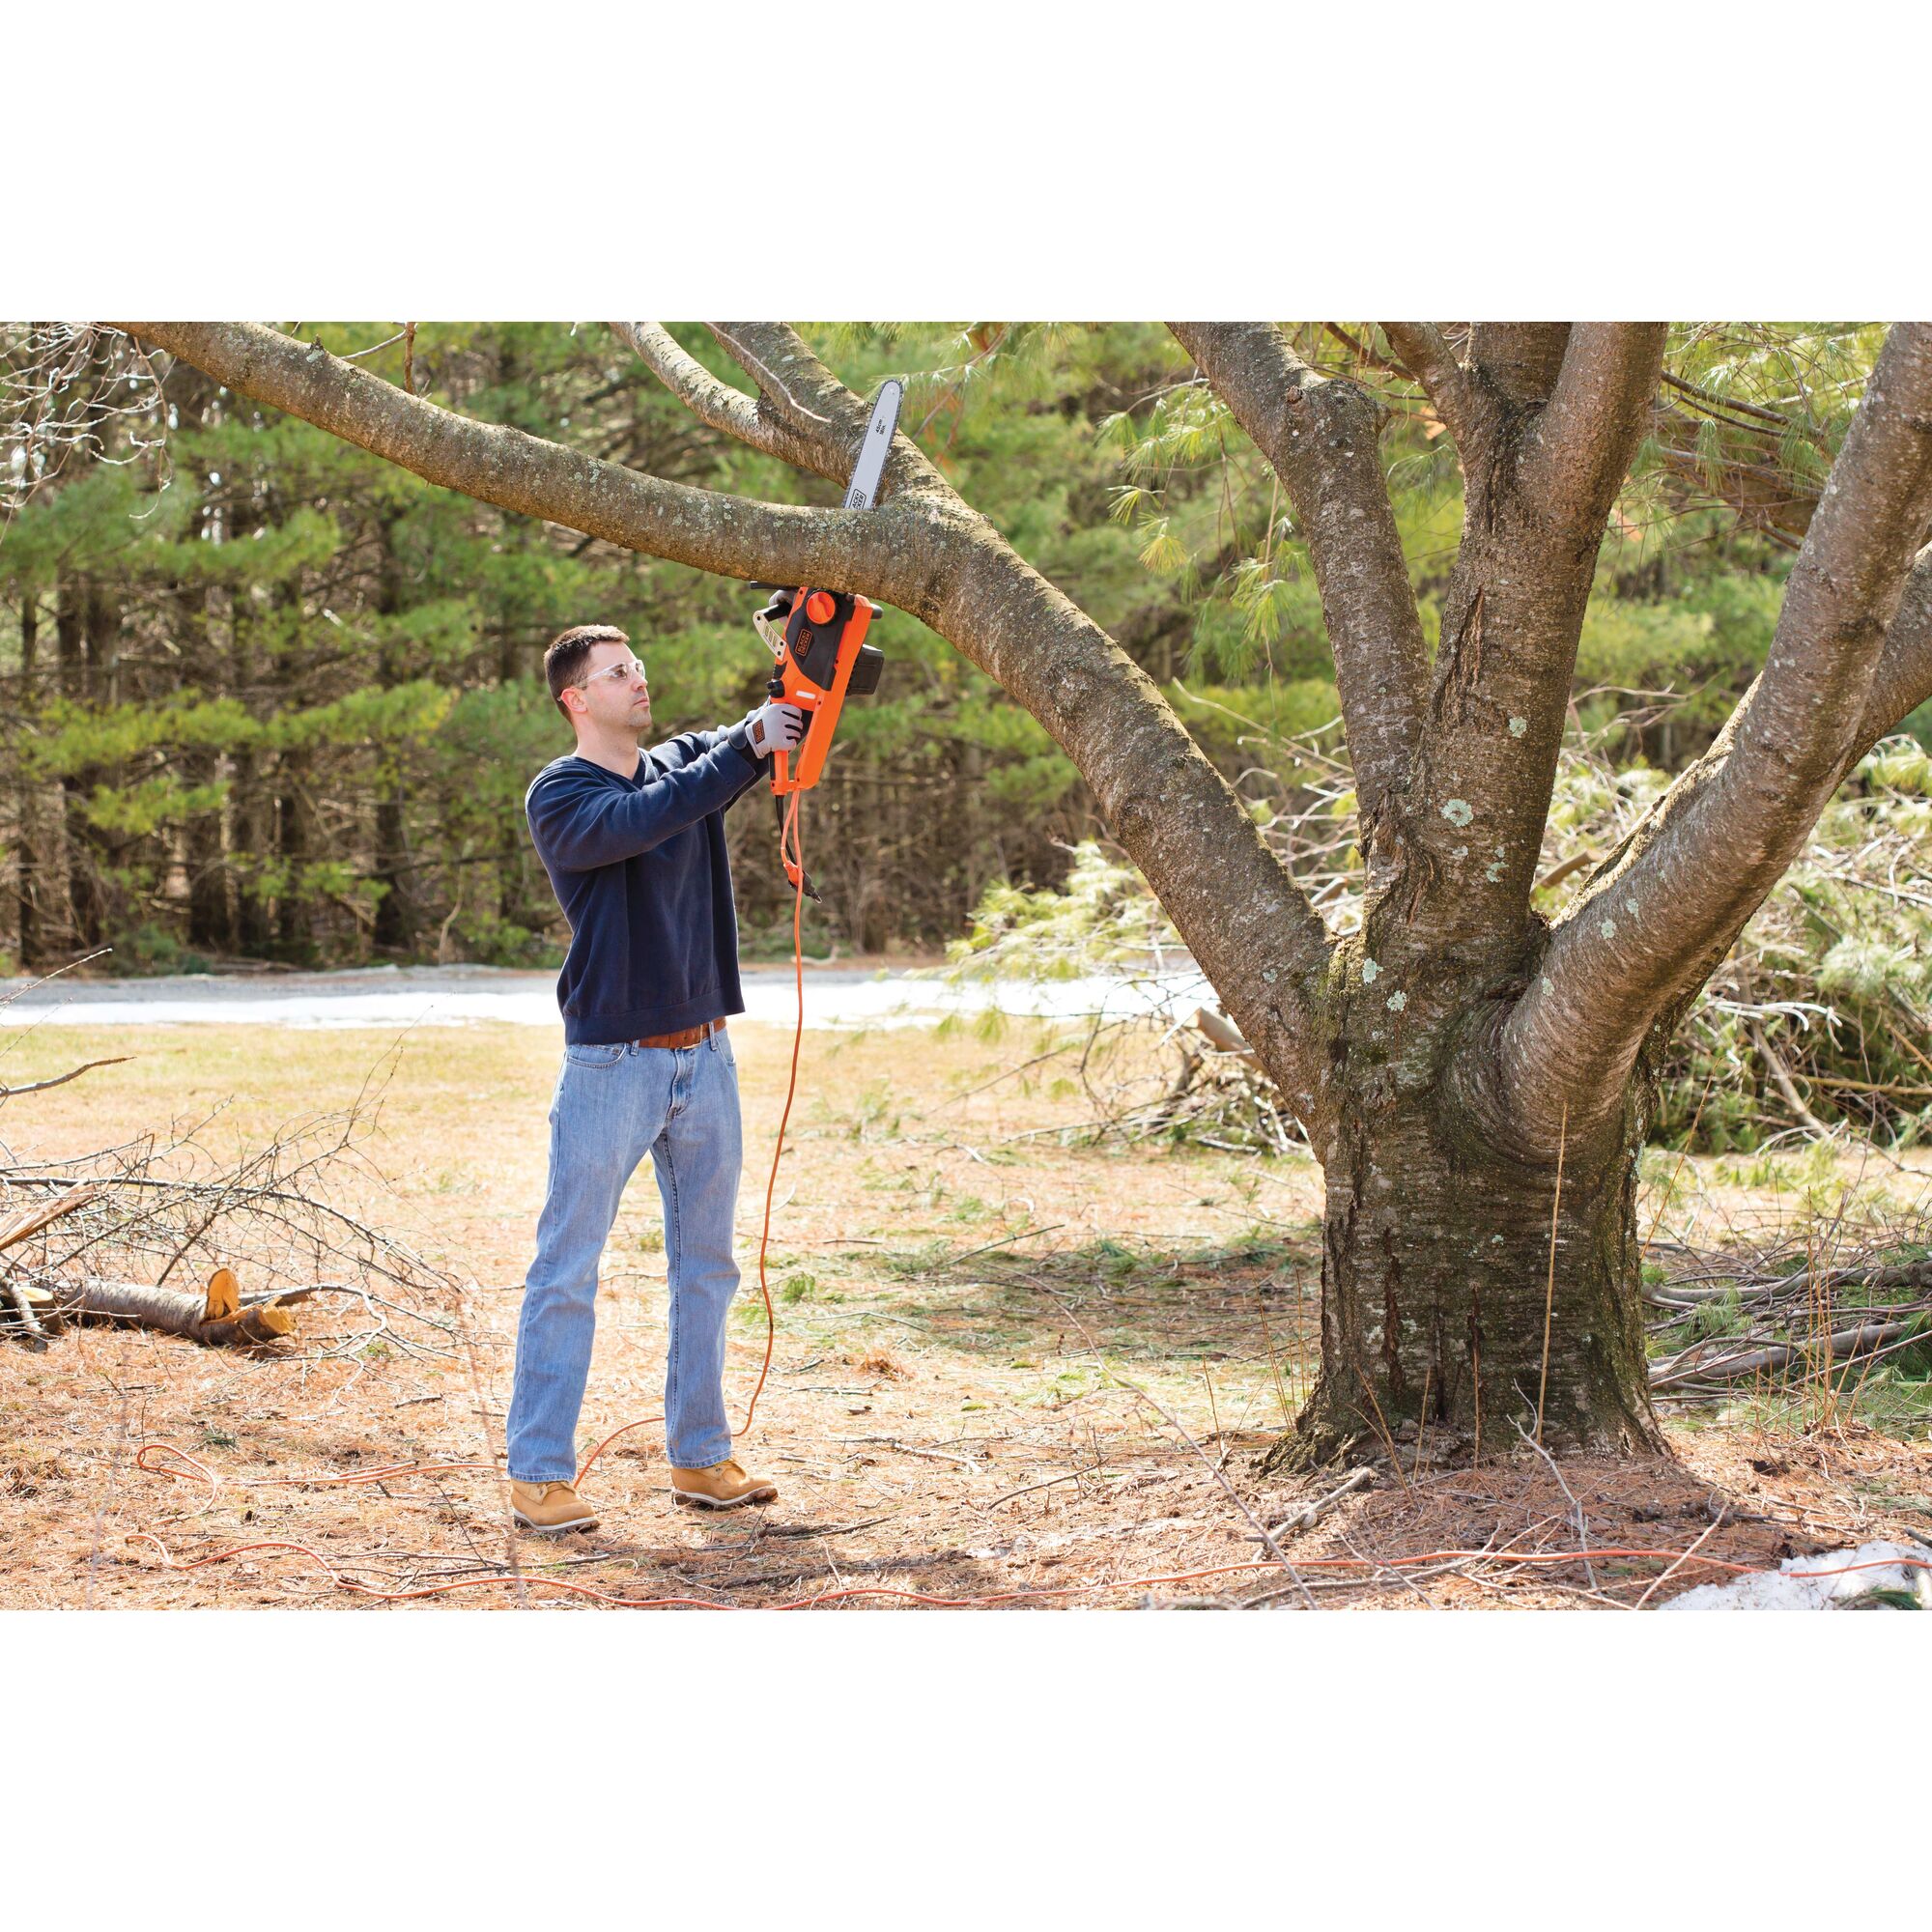 Chainsaw being used by a person to cut tree.\n